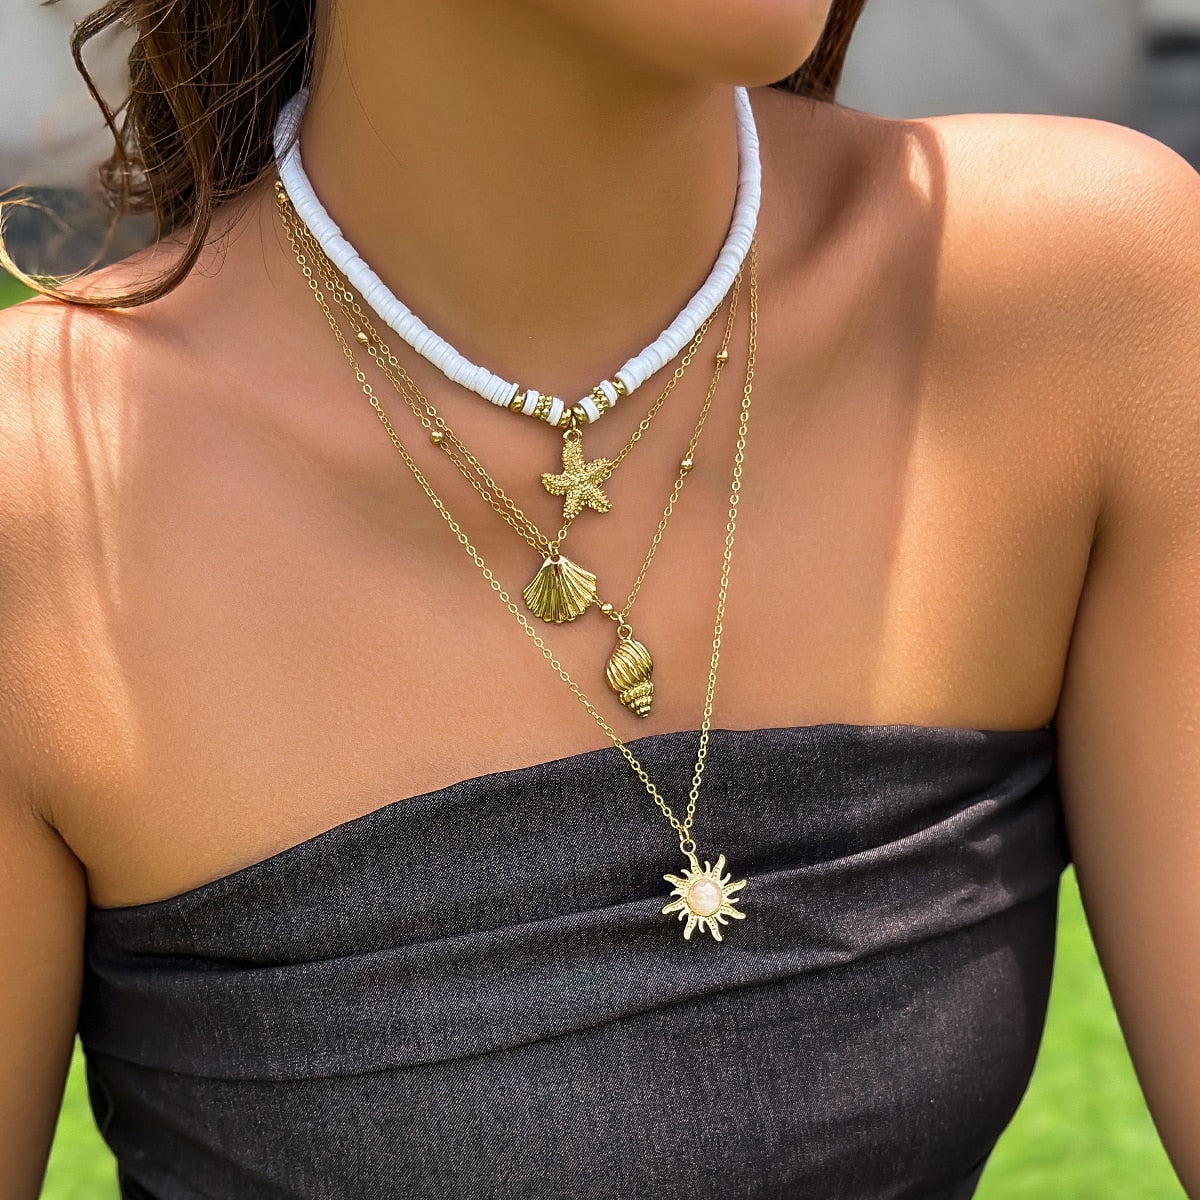 Maytrends Bohemia Soft Pottery Beads Necklace Fashion Shell Star Sun Pendant Layered Chain Necklace Women Summer Beach Simple Neck Jewelry